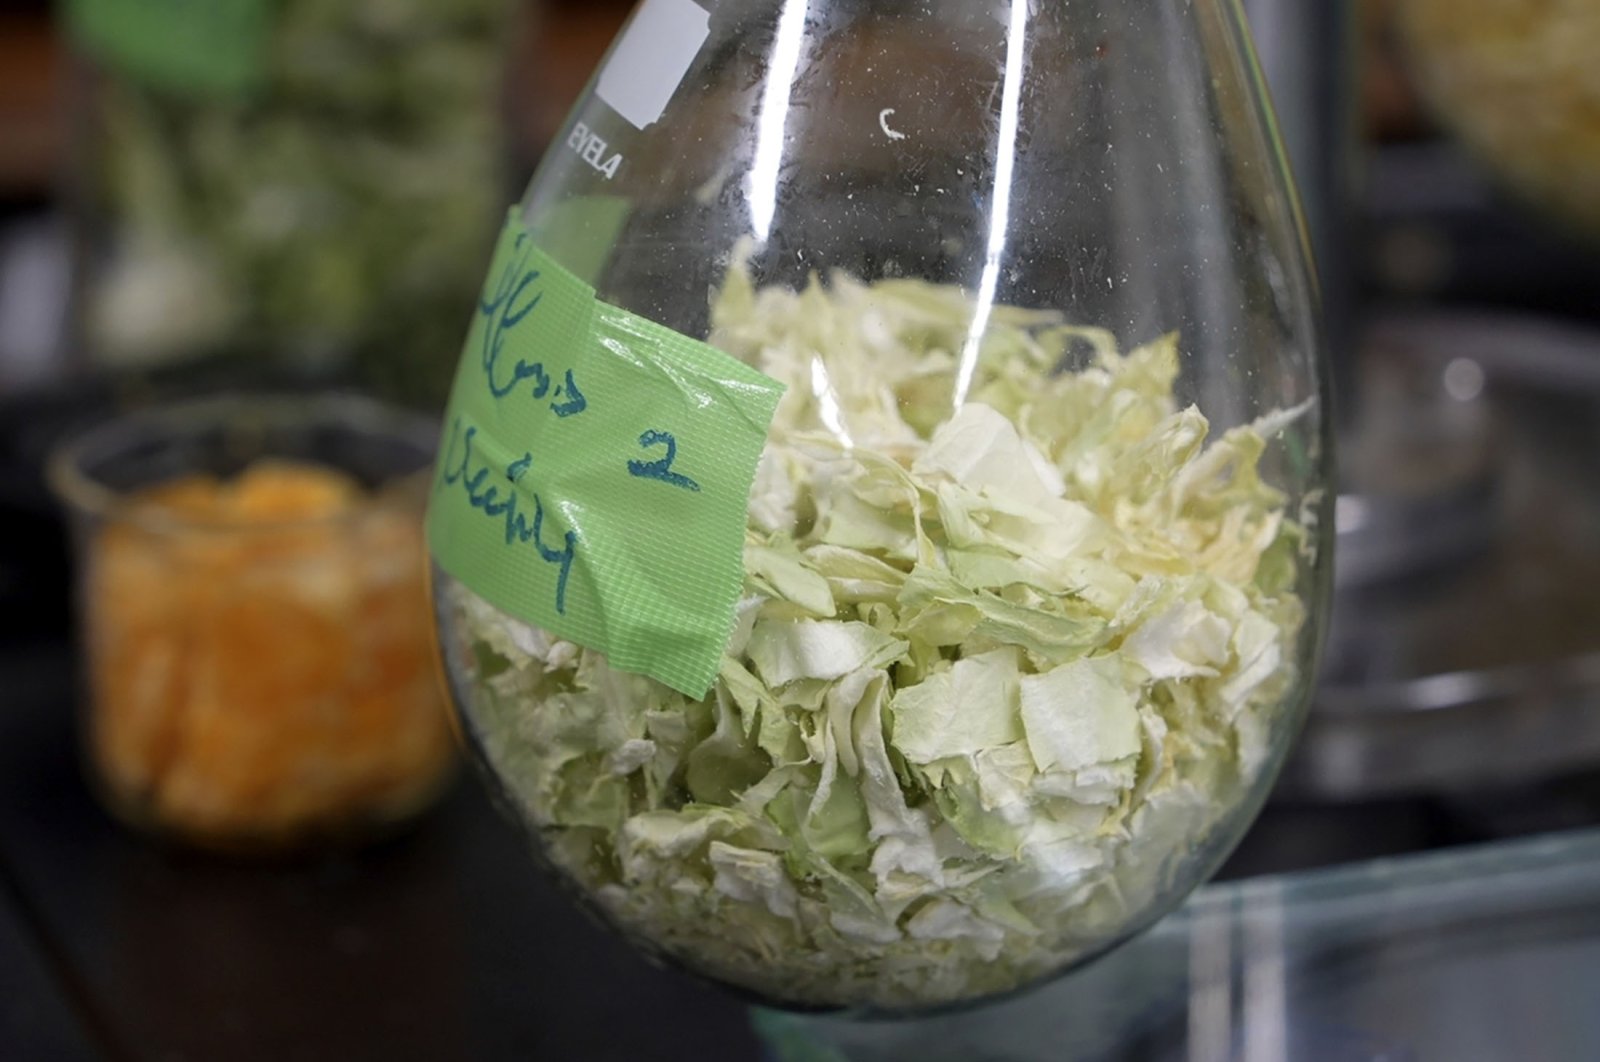 Chinese cabbage is seen being dried in a glass flask at the Tokyo University laboratory, Tokyo, Japan, May 26, 2022. (AP Photo)